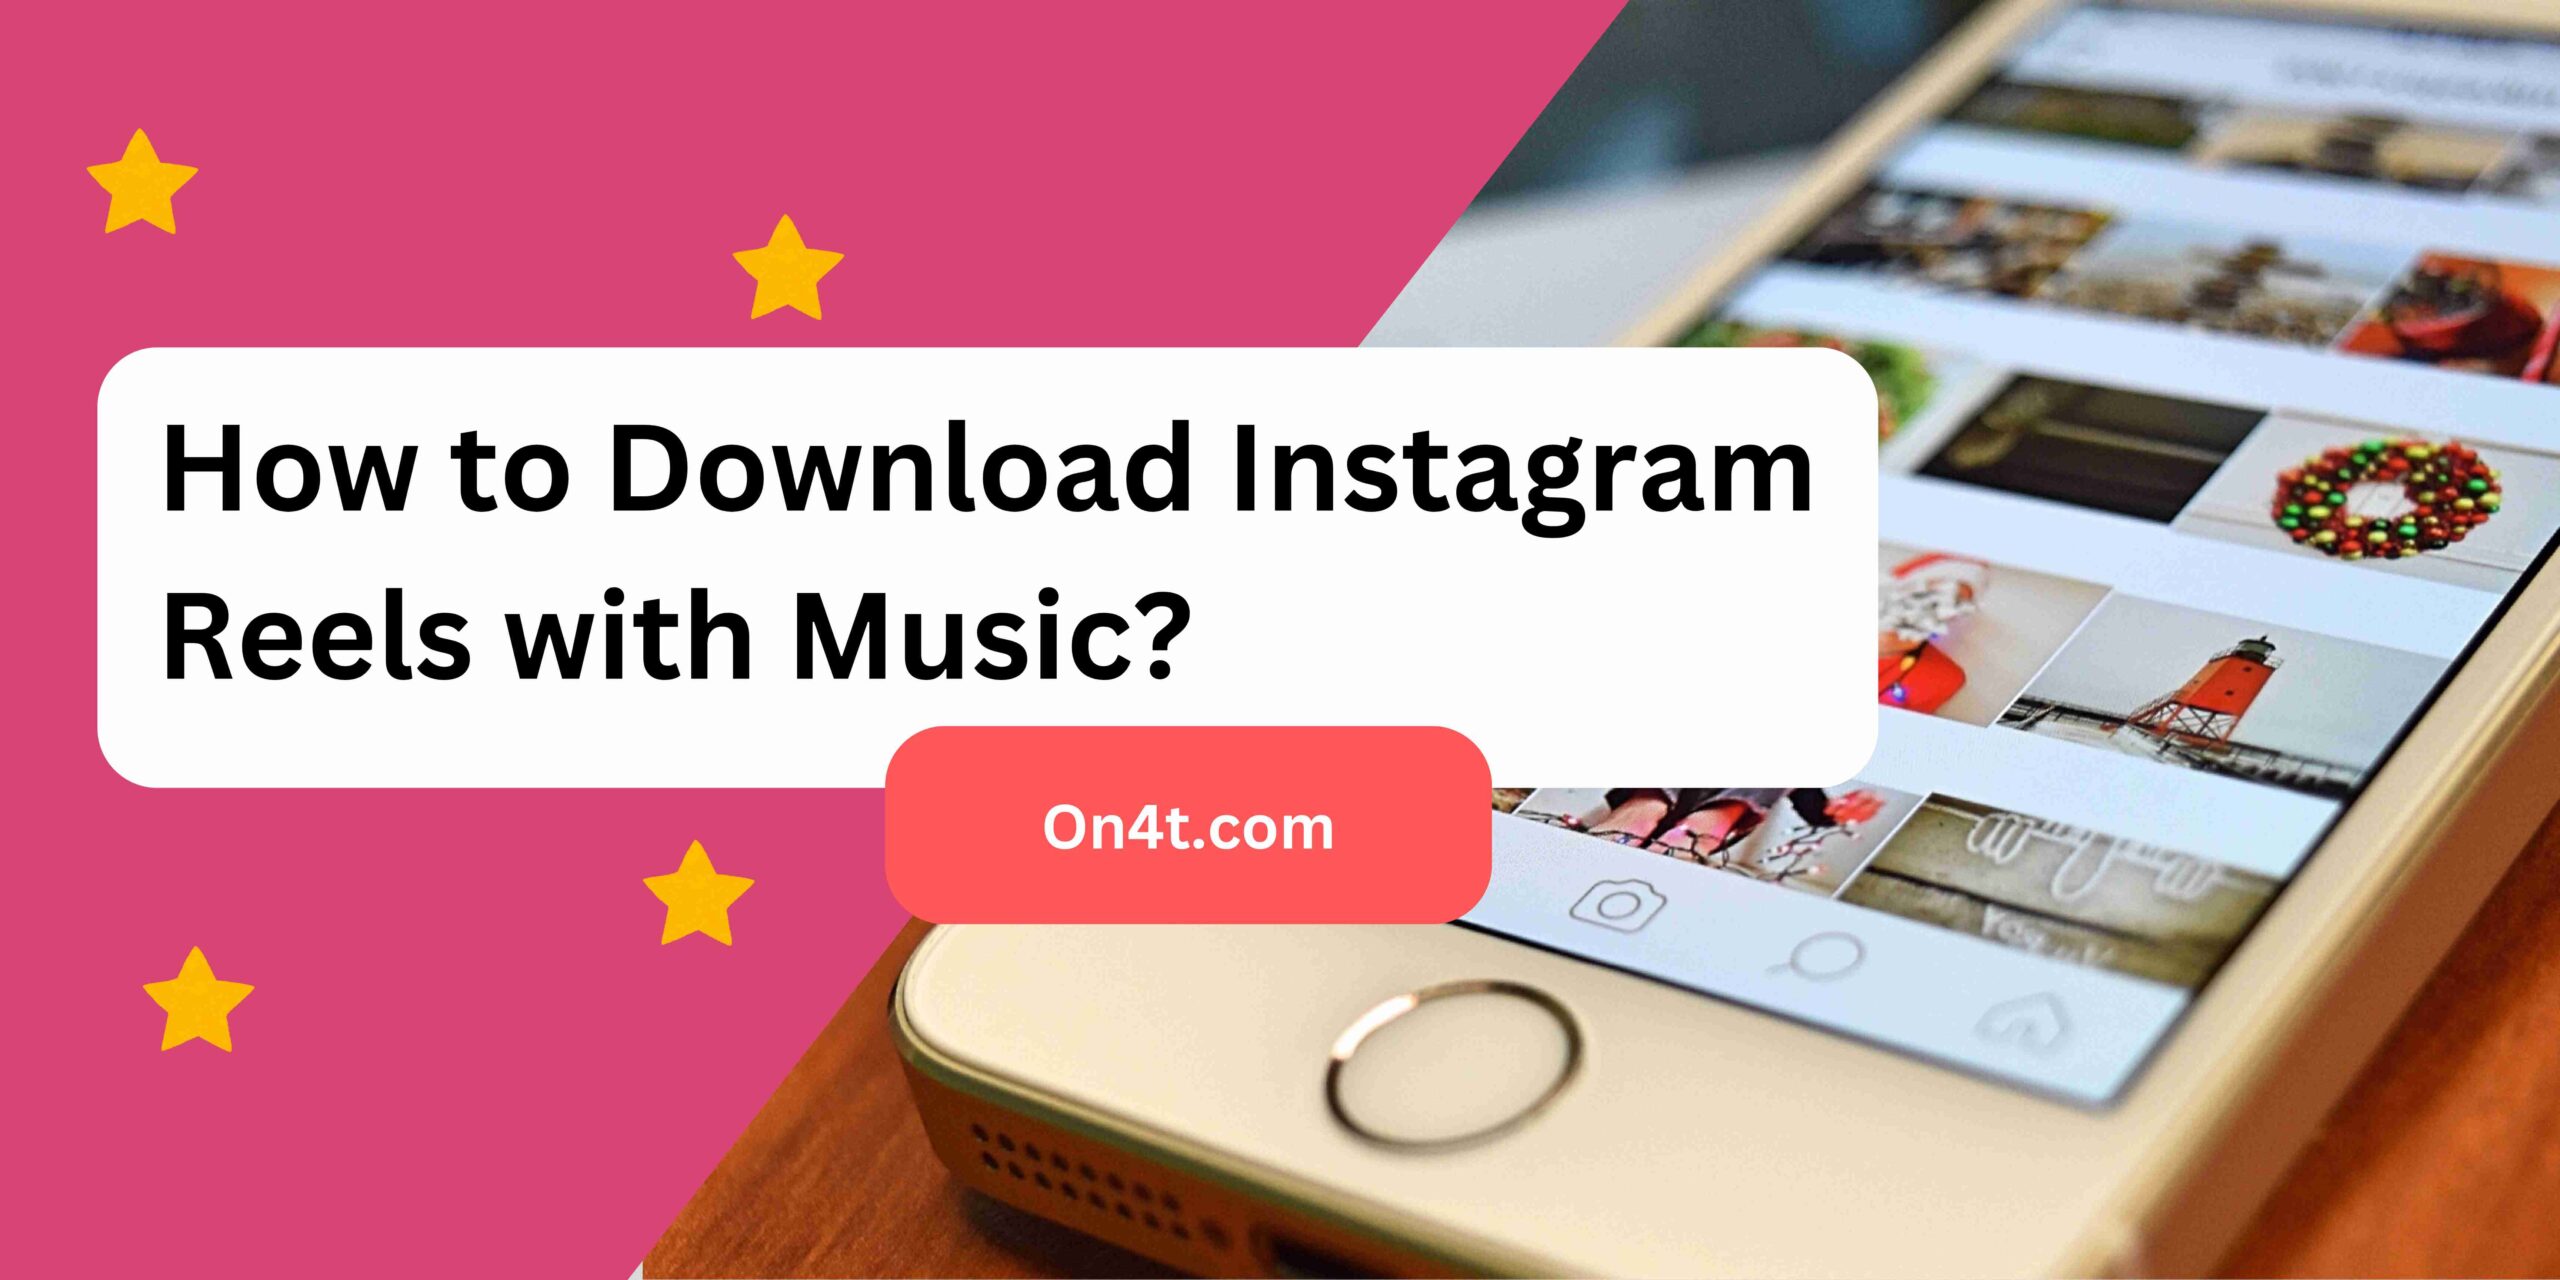 How to Download Instagram Reels with Music?